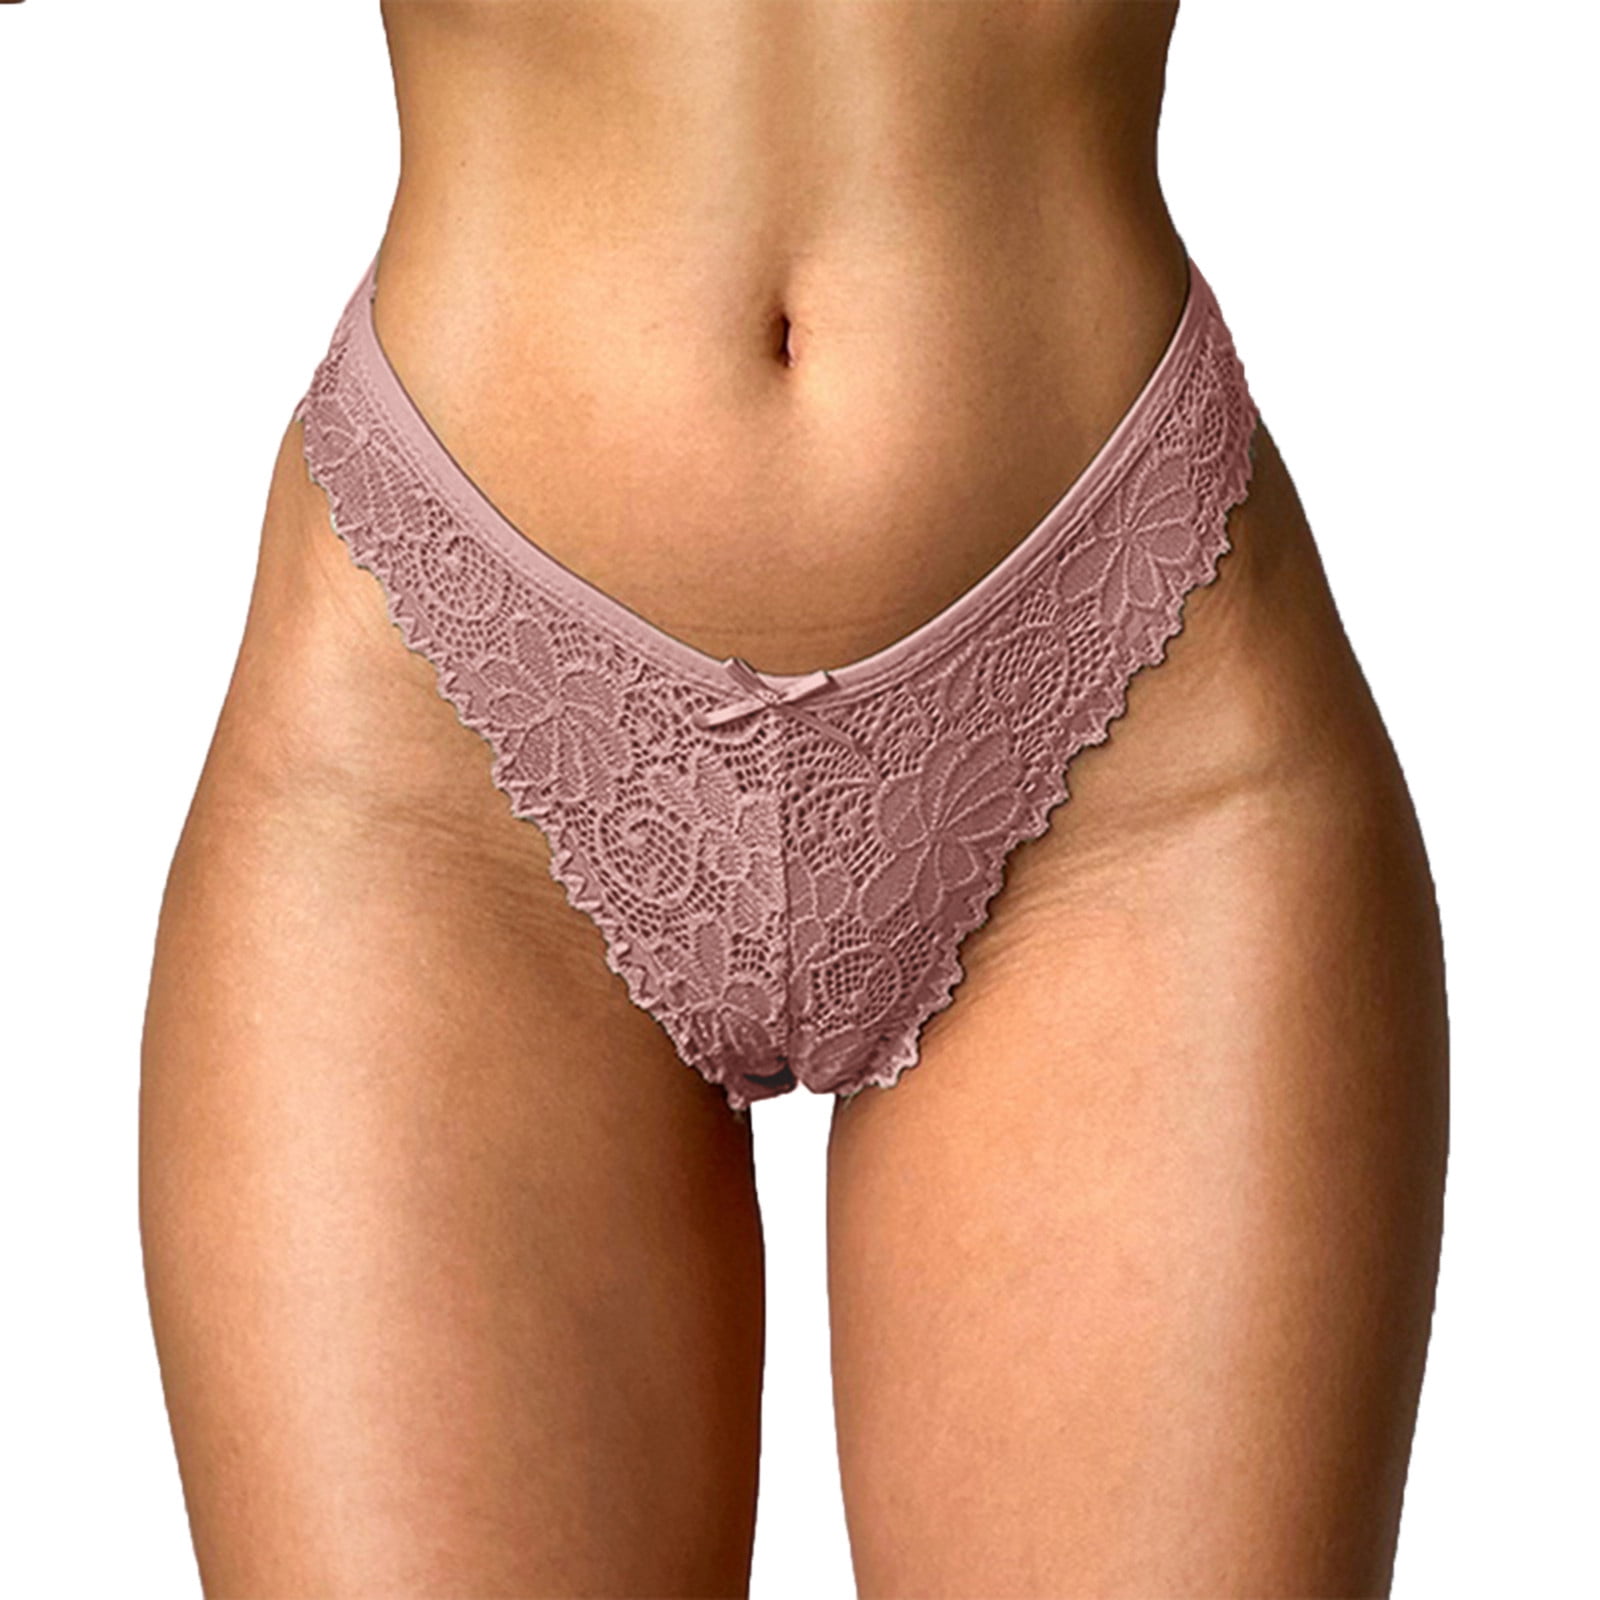 JDEFEG Womens Wool Underwear Packs Women Floral Lace Mesh Panties Low Rise  Hollow Out Transparent Plus Size Underwear Lace Bikini Underwear Lace Pink